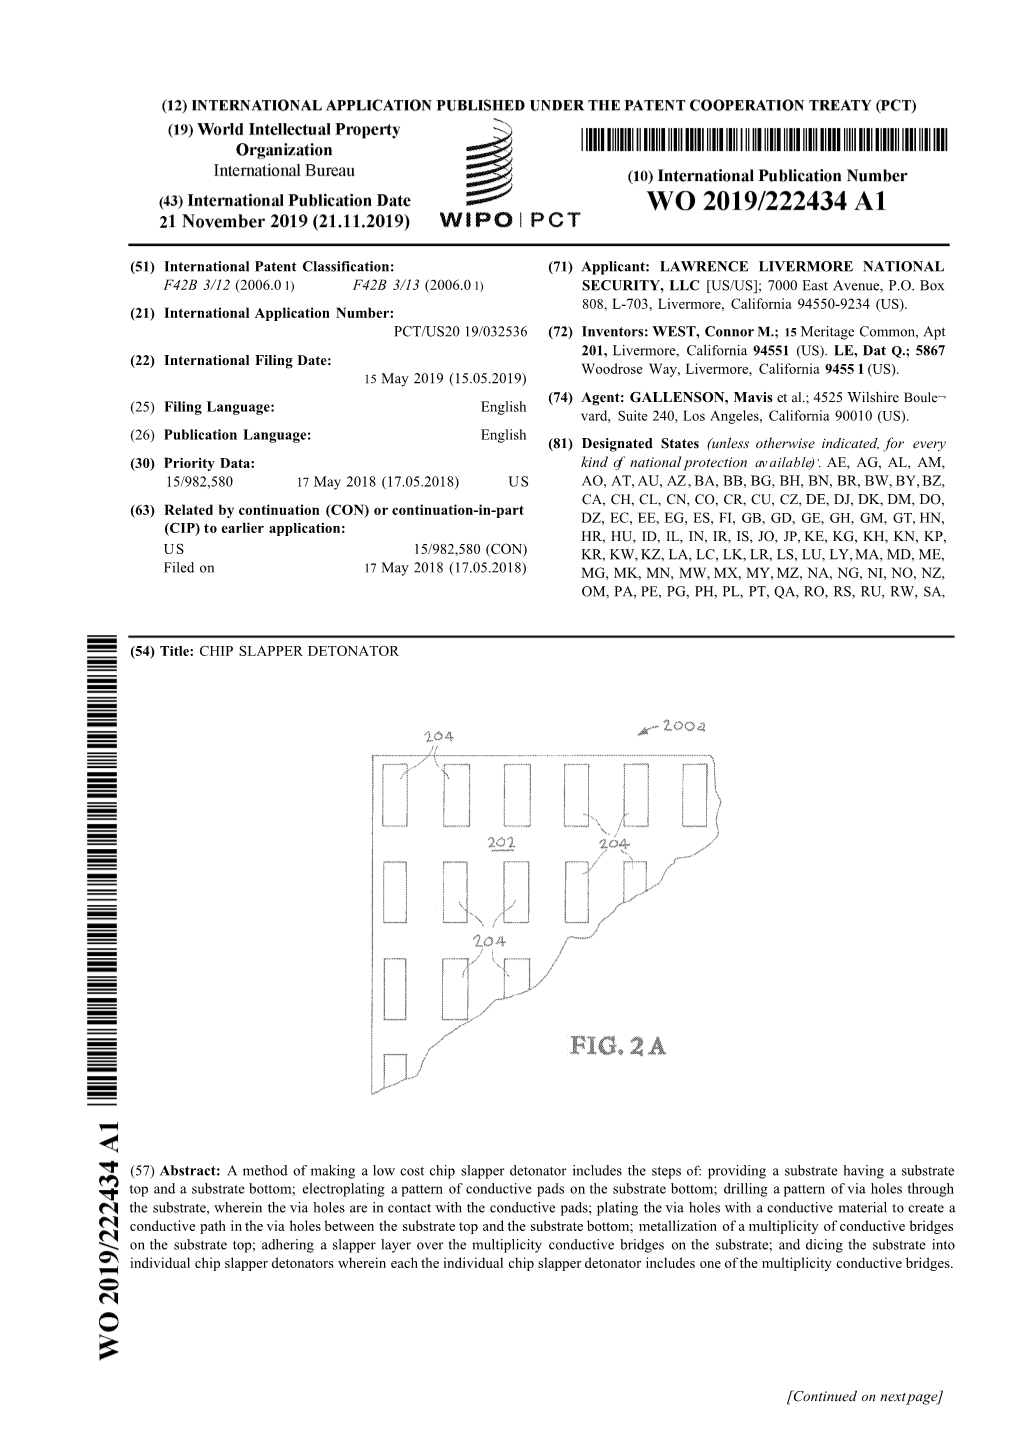 51) International Patent Classification: (71) Applicant: LAWRENCE LIVERMORE NATIONAL F42B 3/12 (2006.0 1) F42B 3/13 (2006.0 1